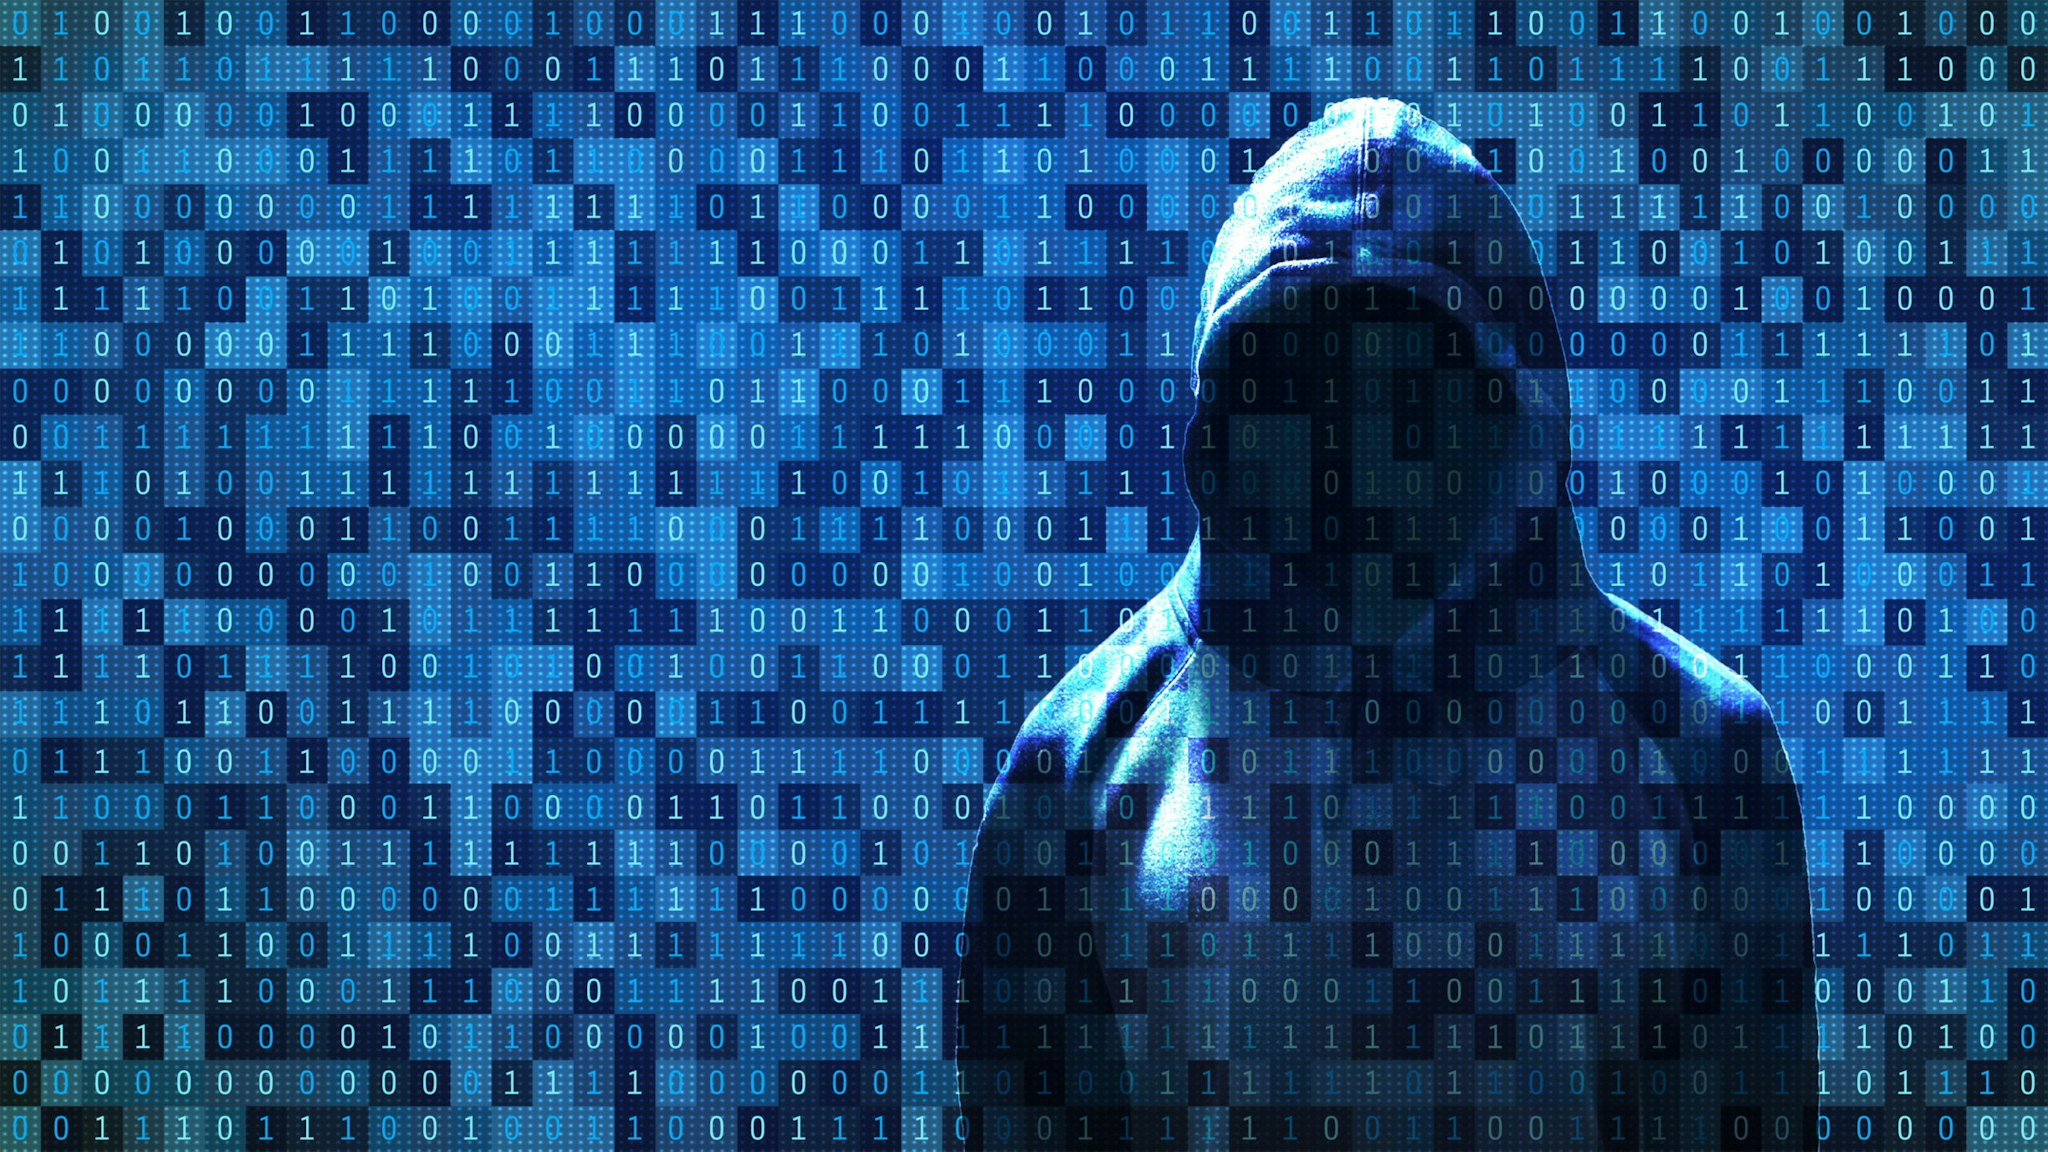 Hacker standing in front of 01 or binary numbers on the computer screen on monitor background matrix, Digital data code in safety security technology concept. Anonymous